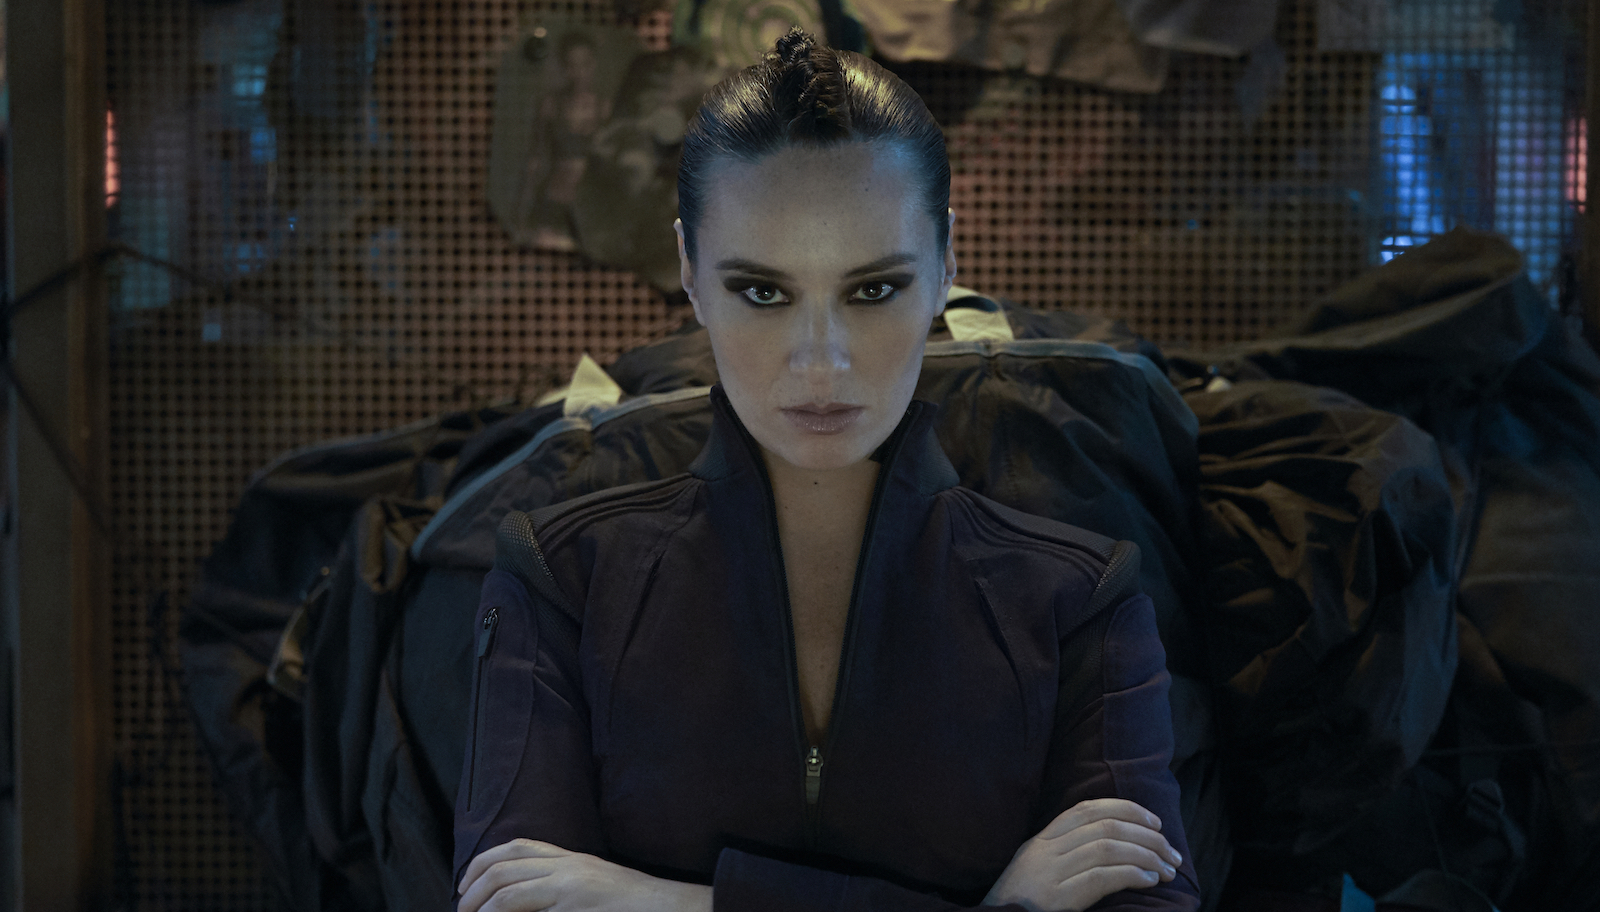 The Expanse Season 5 Drummer S Polyamory Is Nothing New For This World Den Of Geek